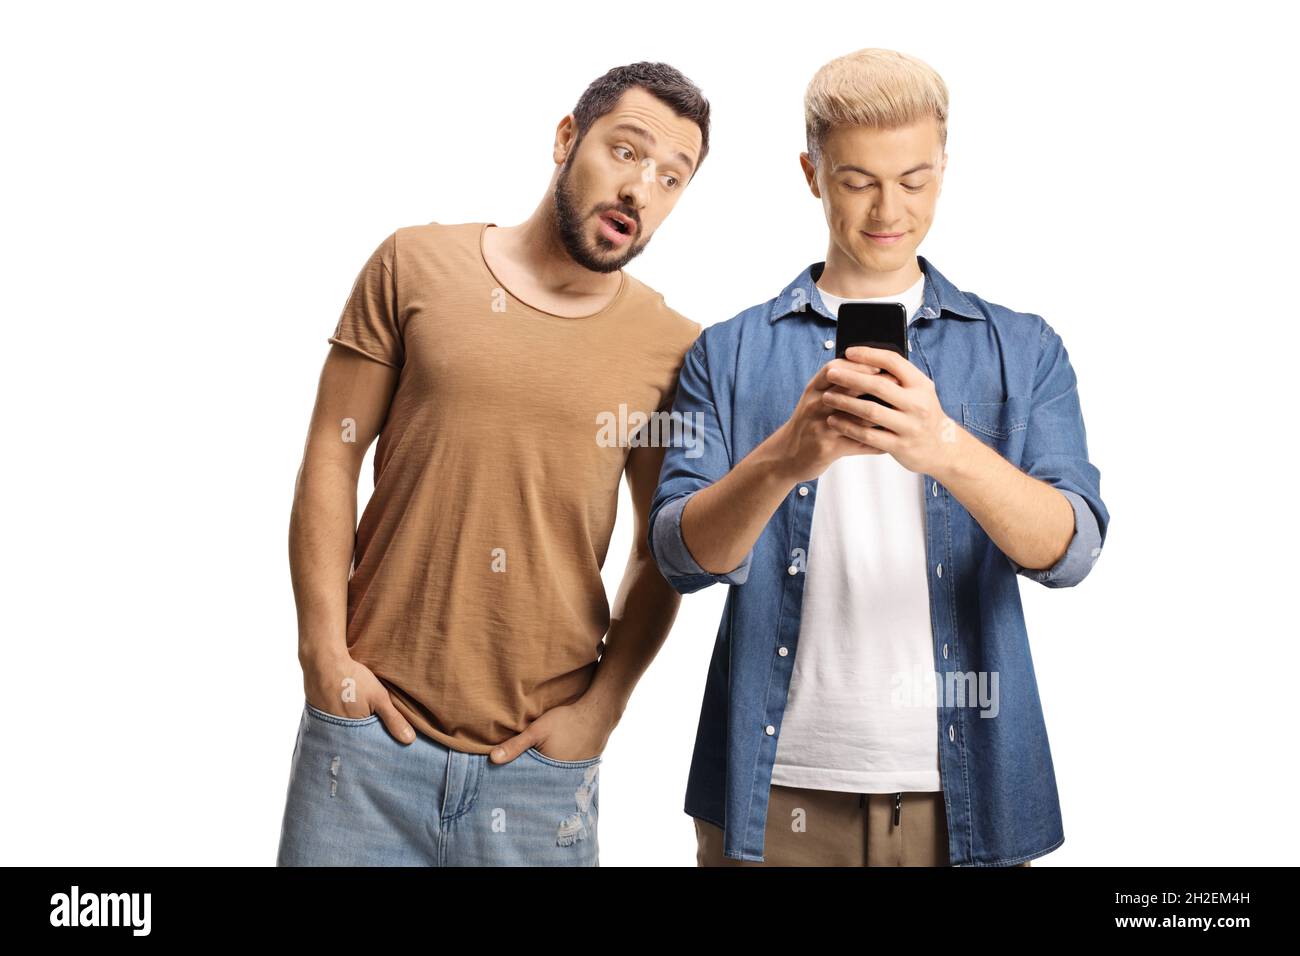 Suspicious guy checking his friend's smartphone isolated on white background Stock Photo